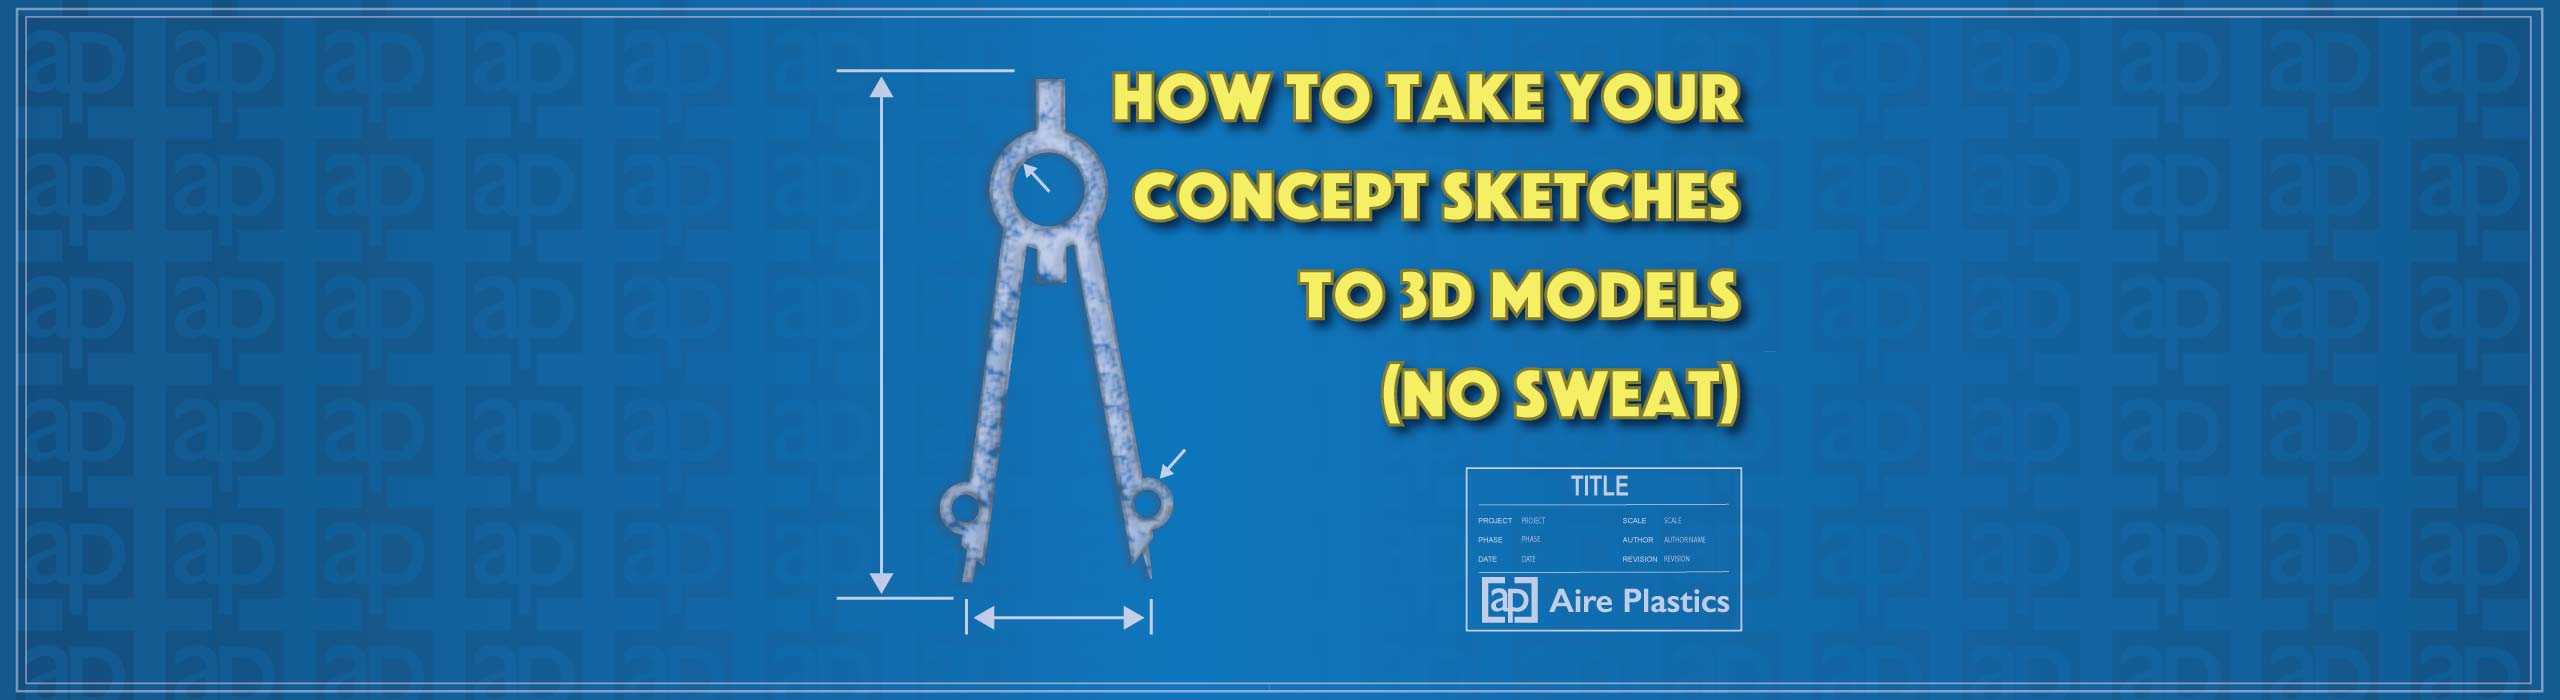 Concept-Sketches-to-3D-Models Title